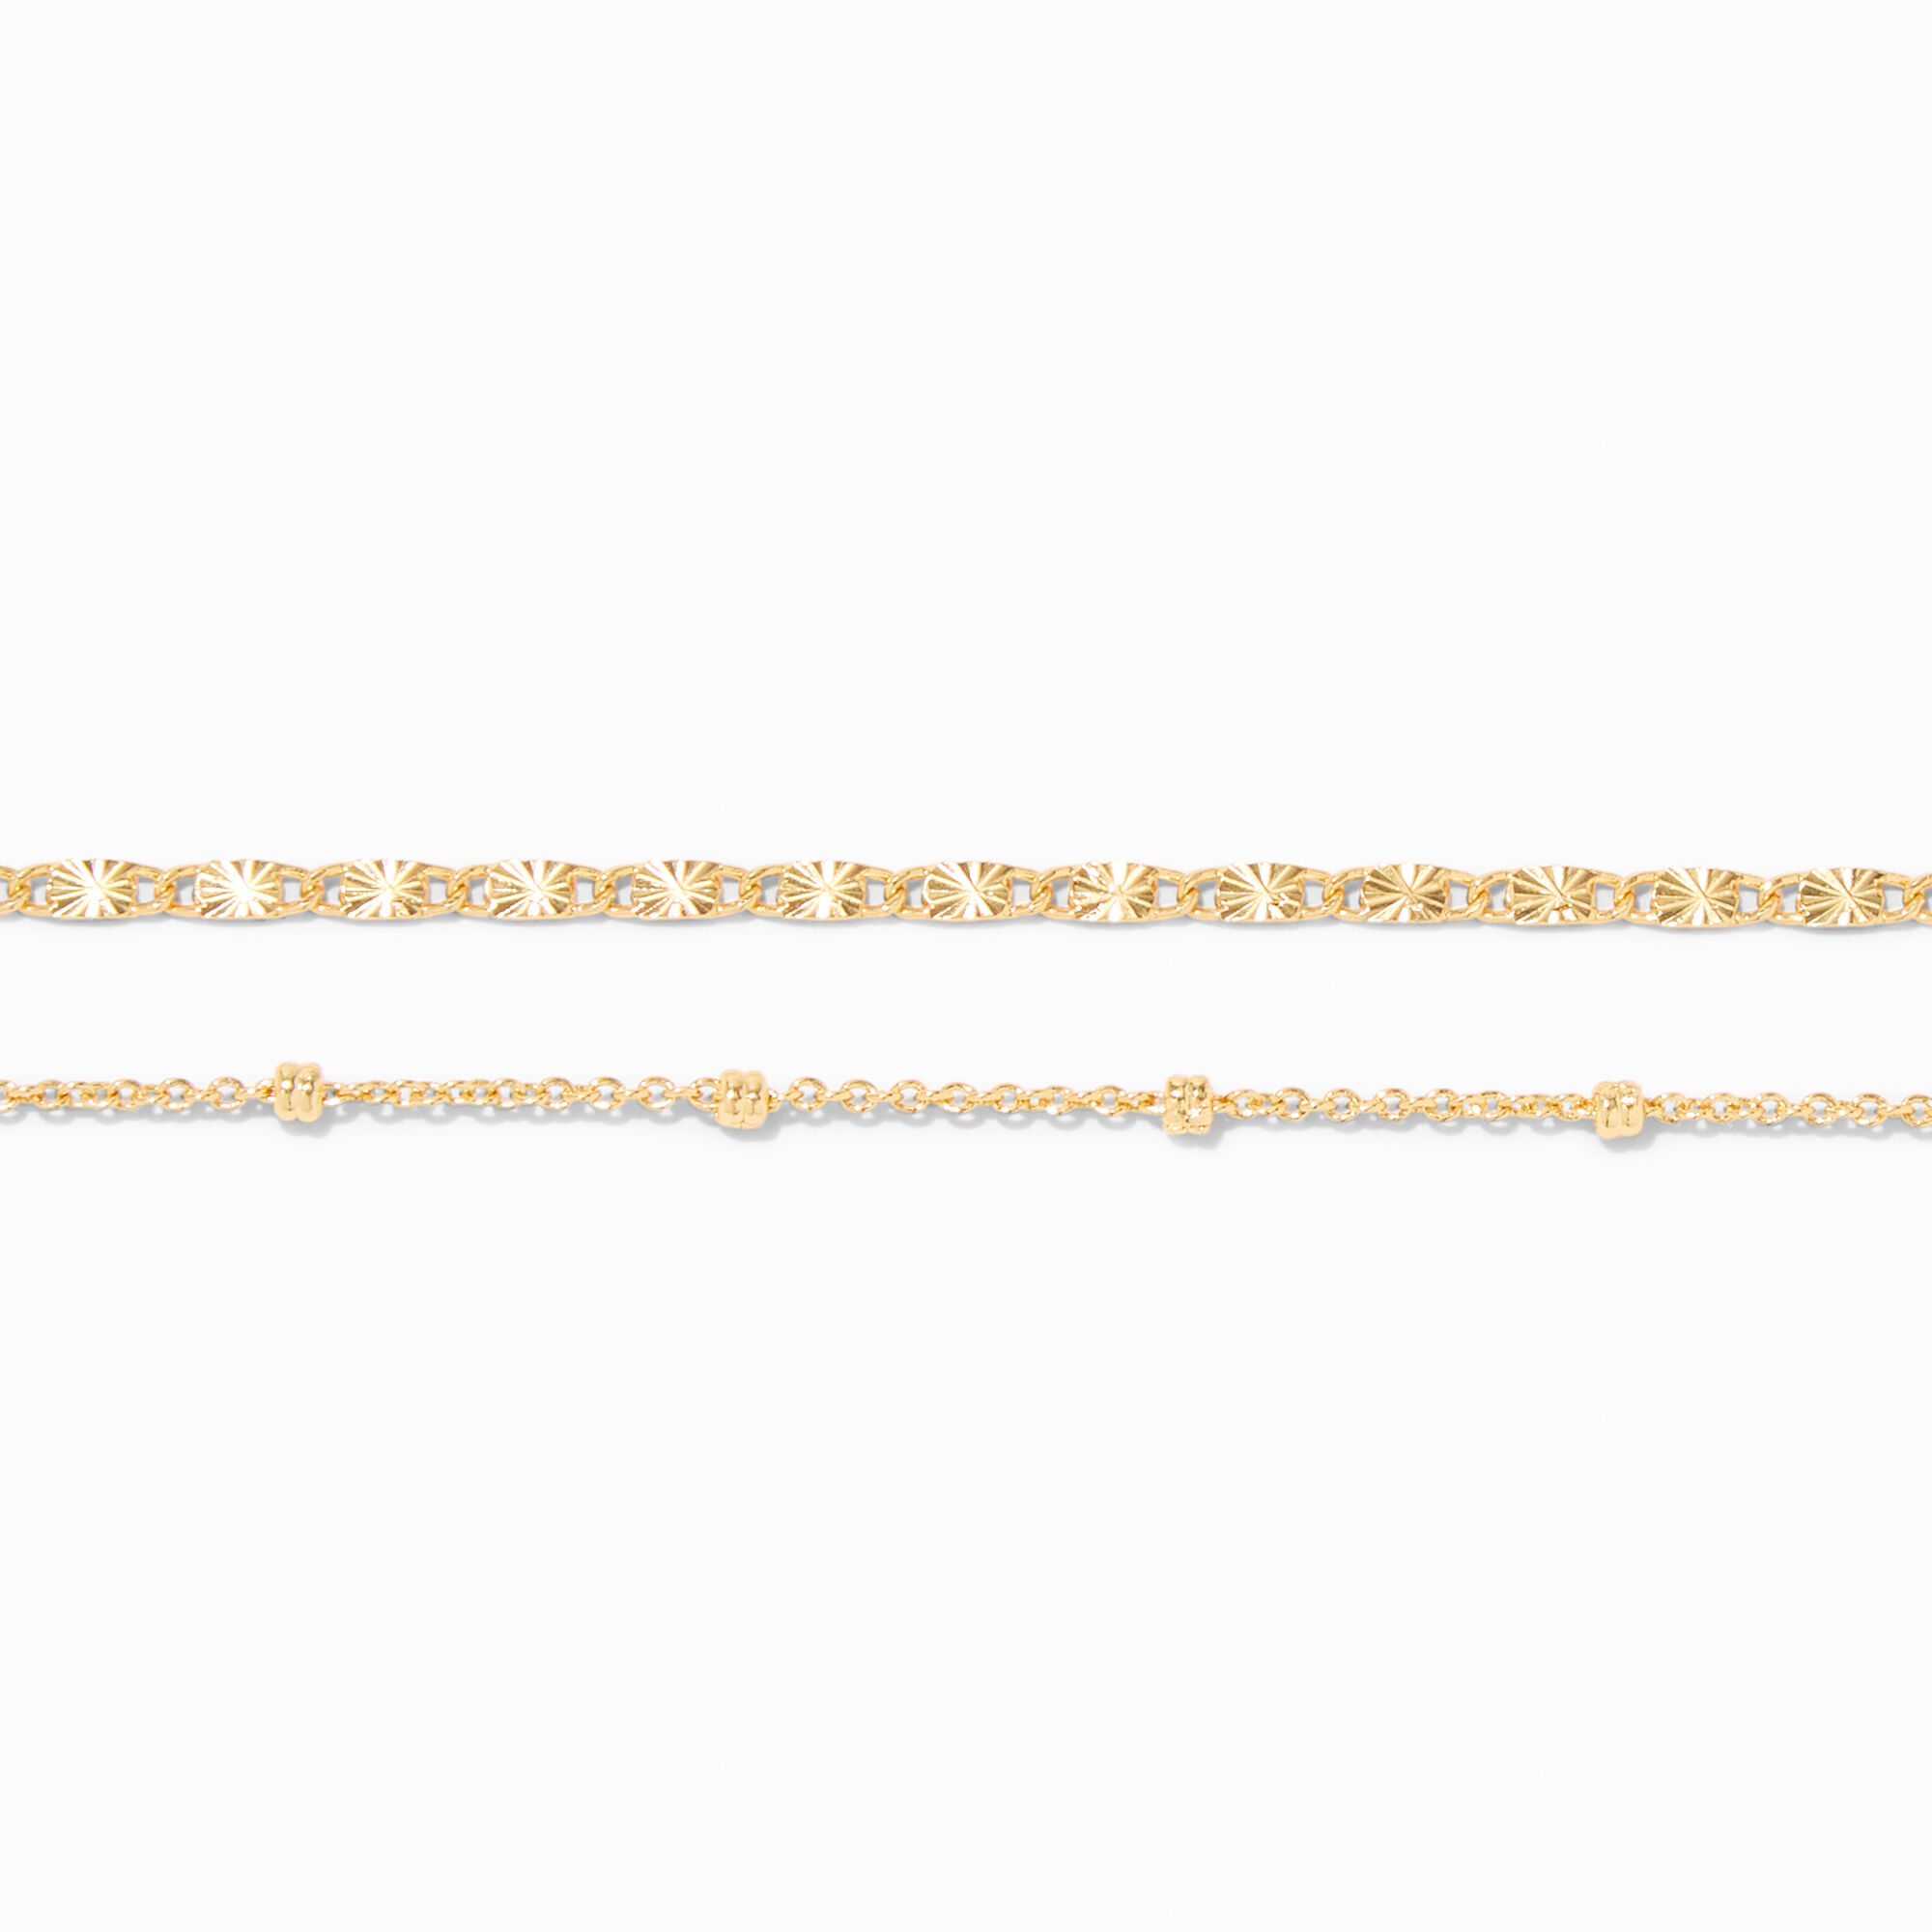 Solid Figaro Chain 18k Yellow Gold Filled Mens Bracelet Link Chain 8.6 Long  From Blingfashion, $11.17 | DHgate.Com